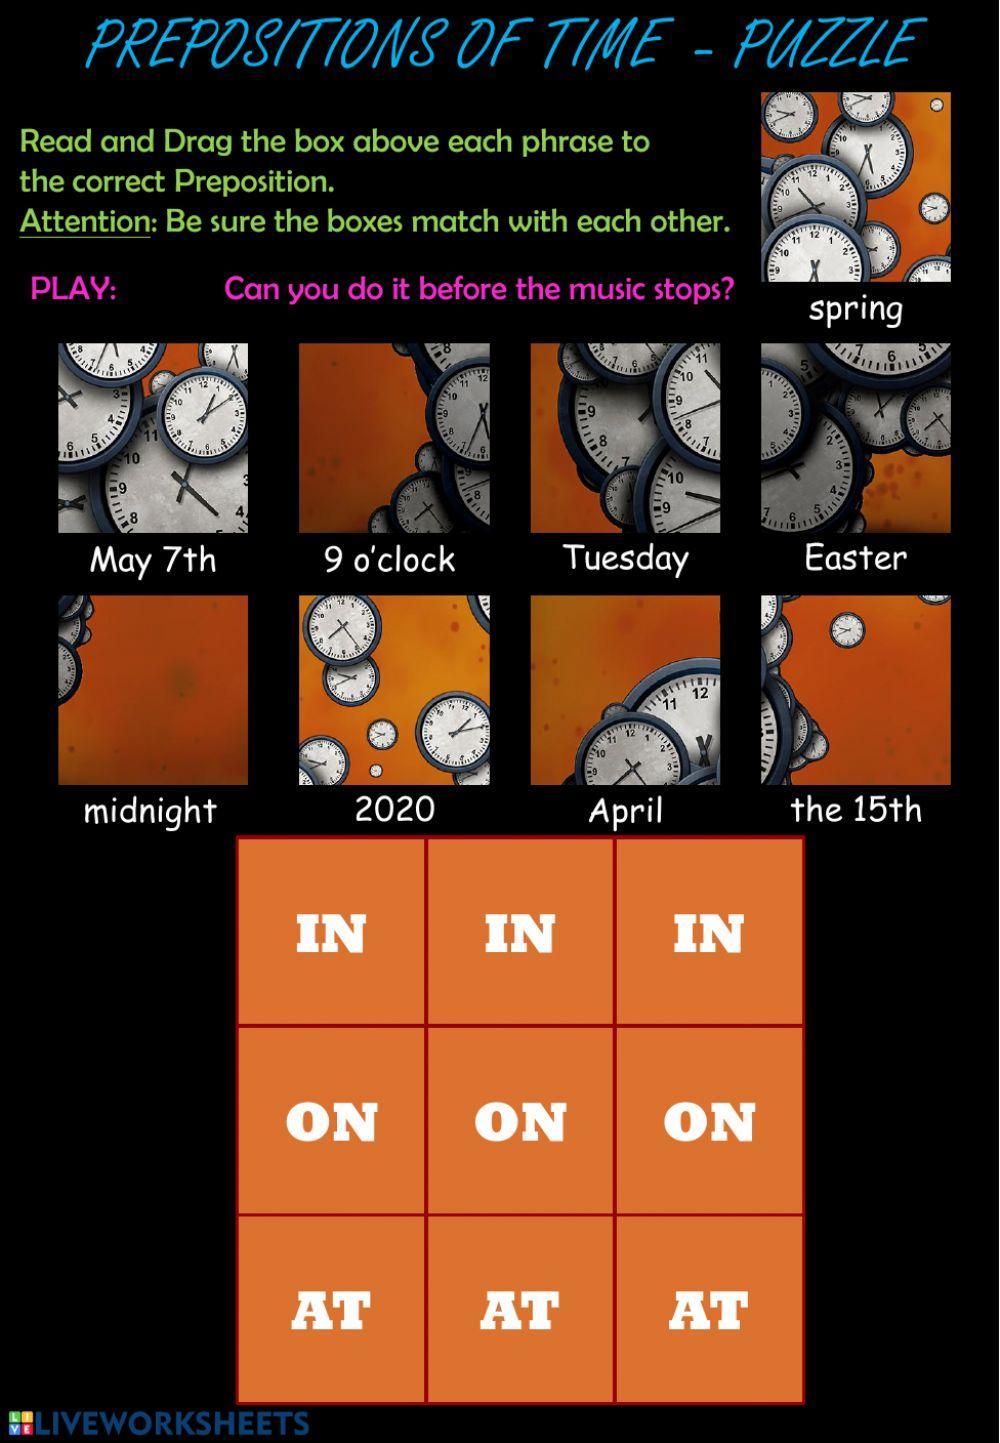 Prepositions of Time puzzle